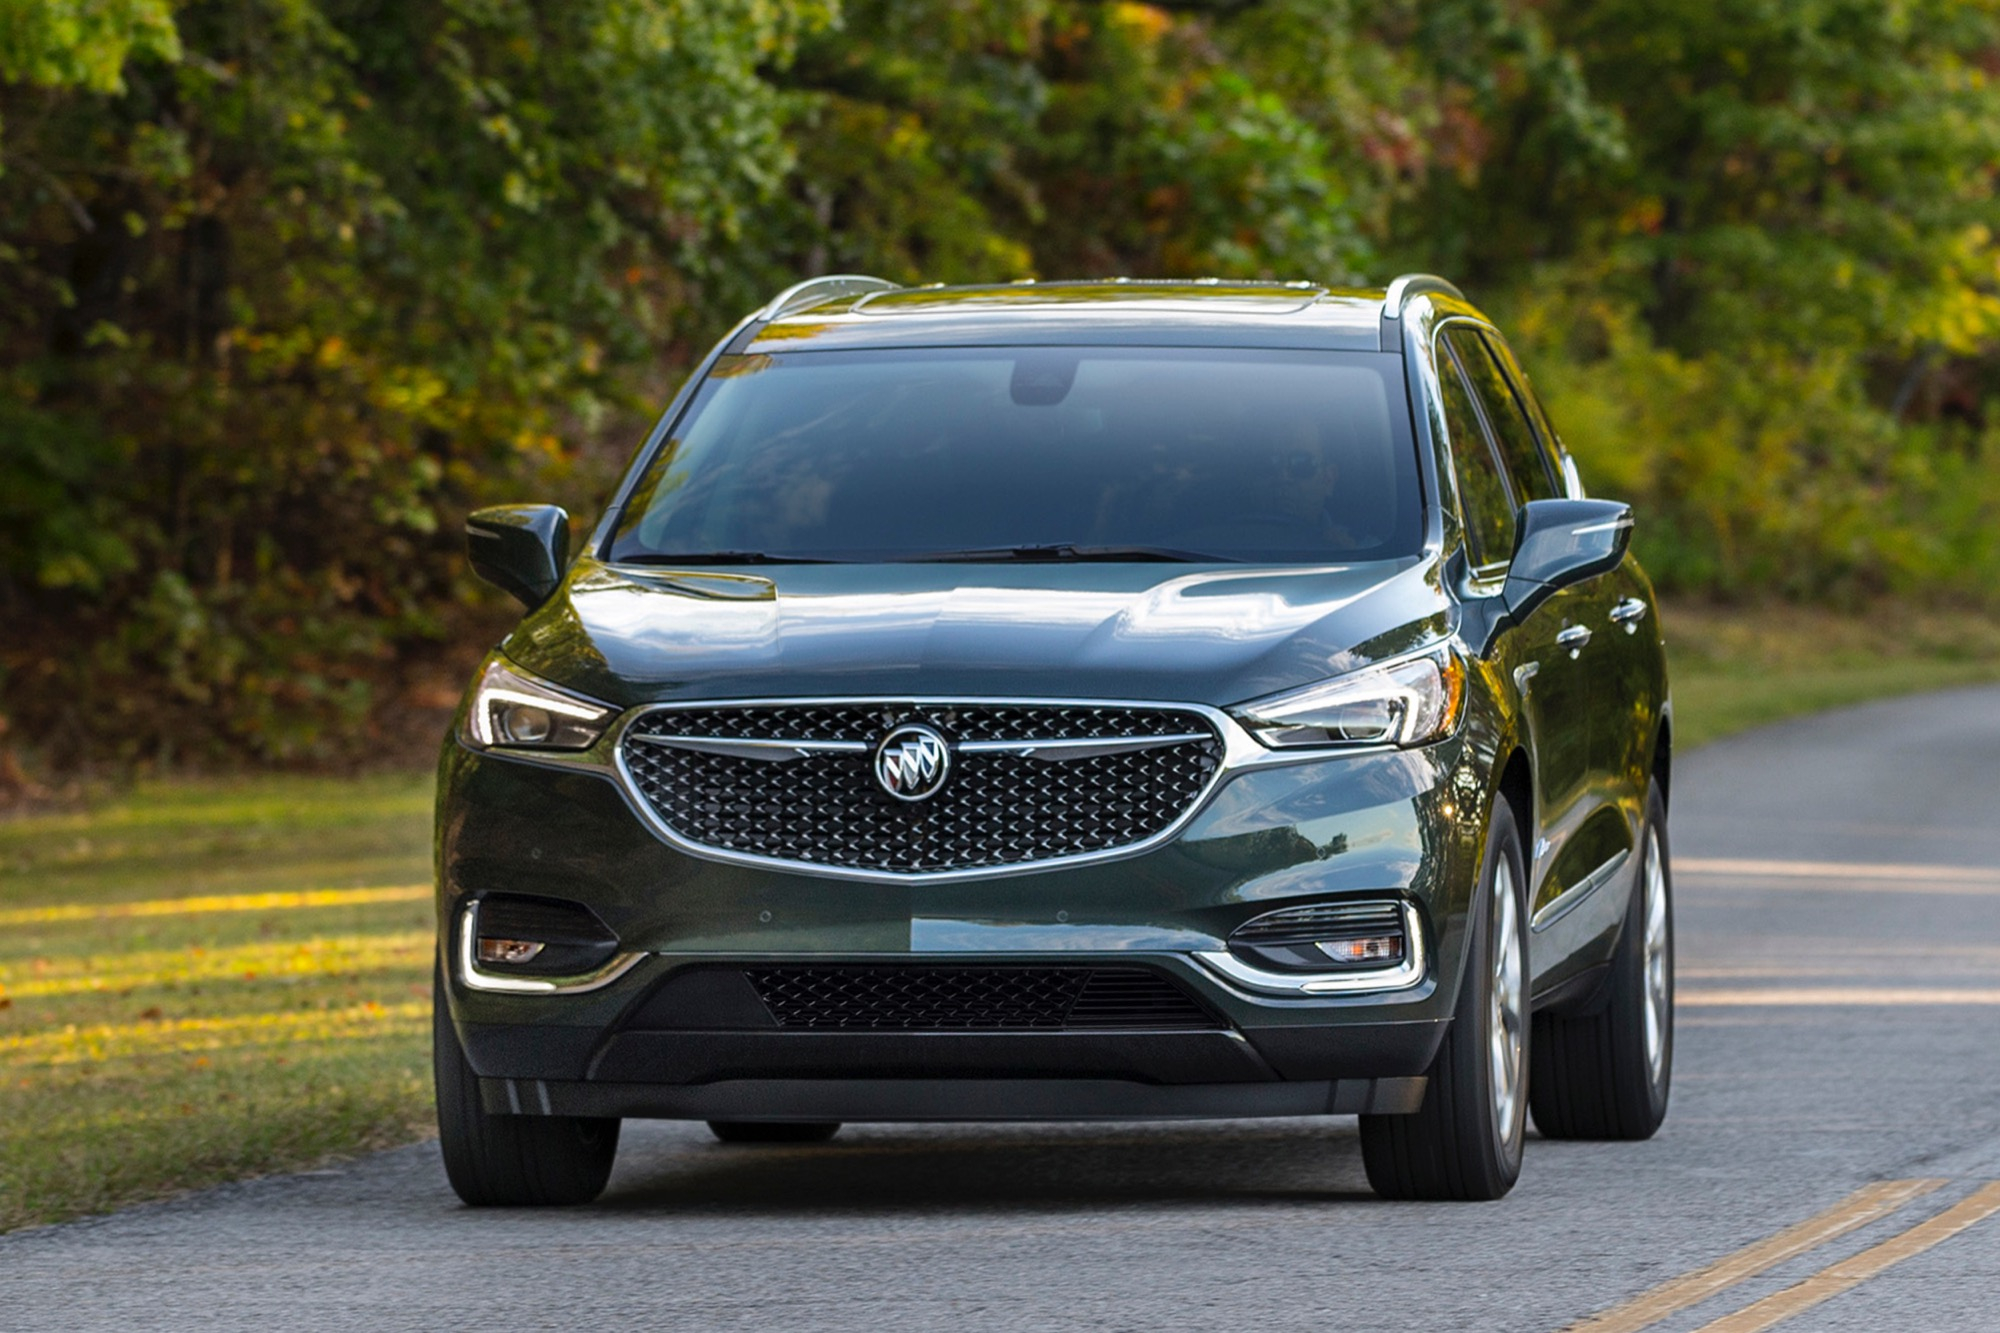 2022 Buick Enclave New Colors, Oil Type, Options | 2021 Buick